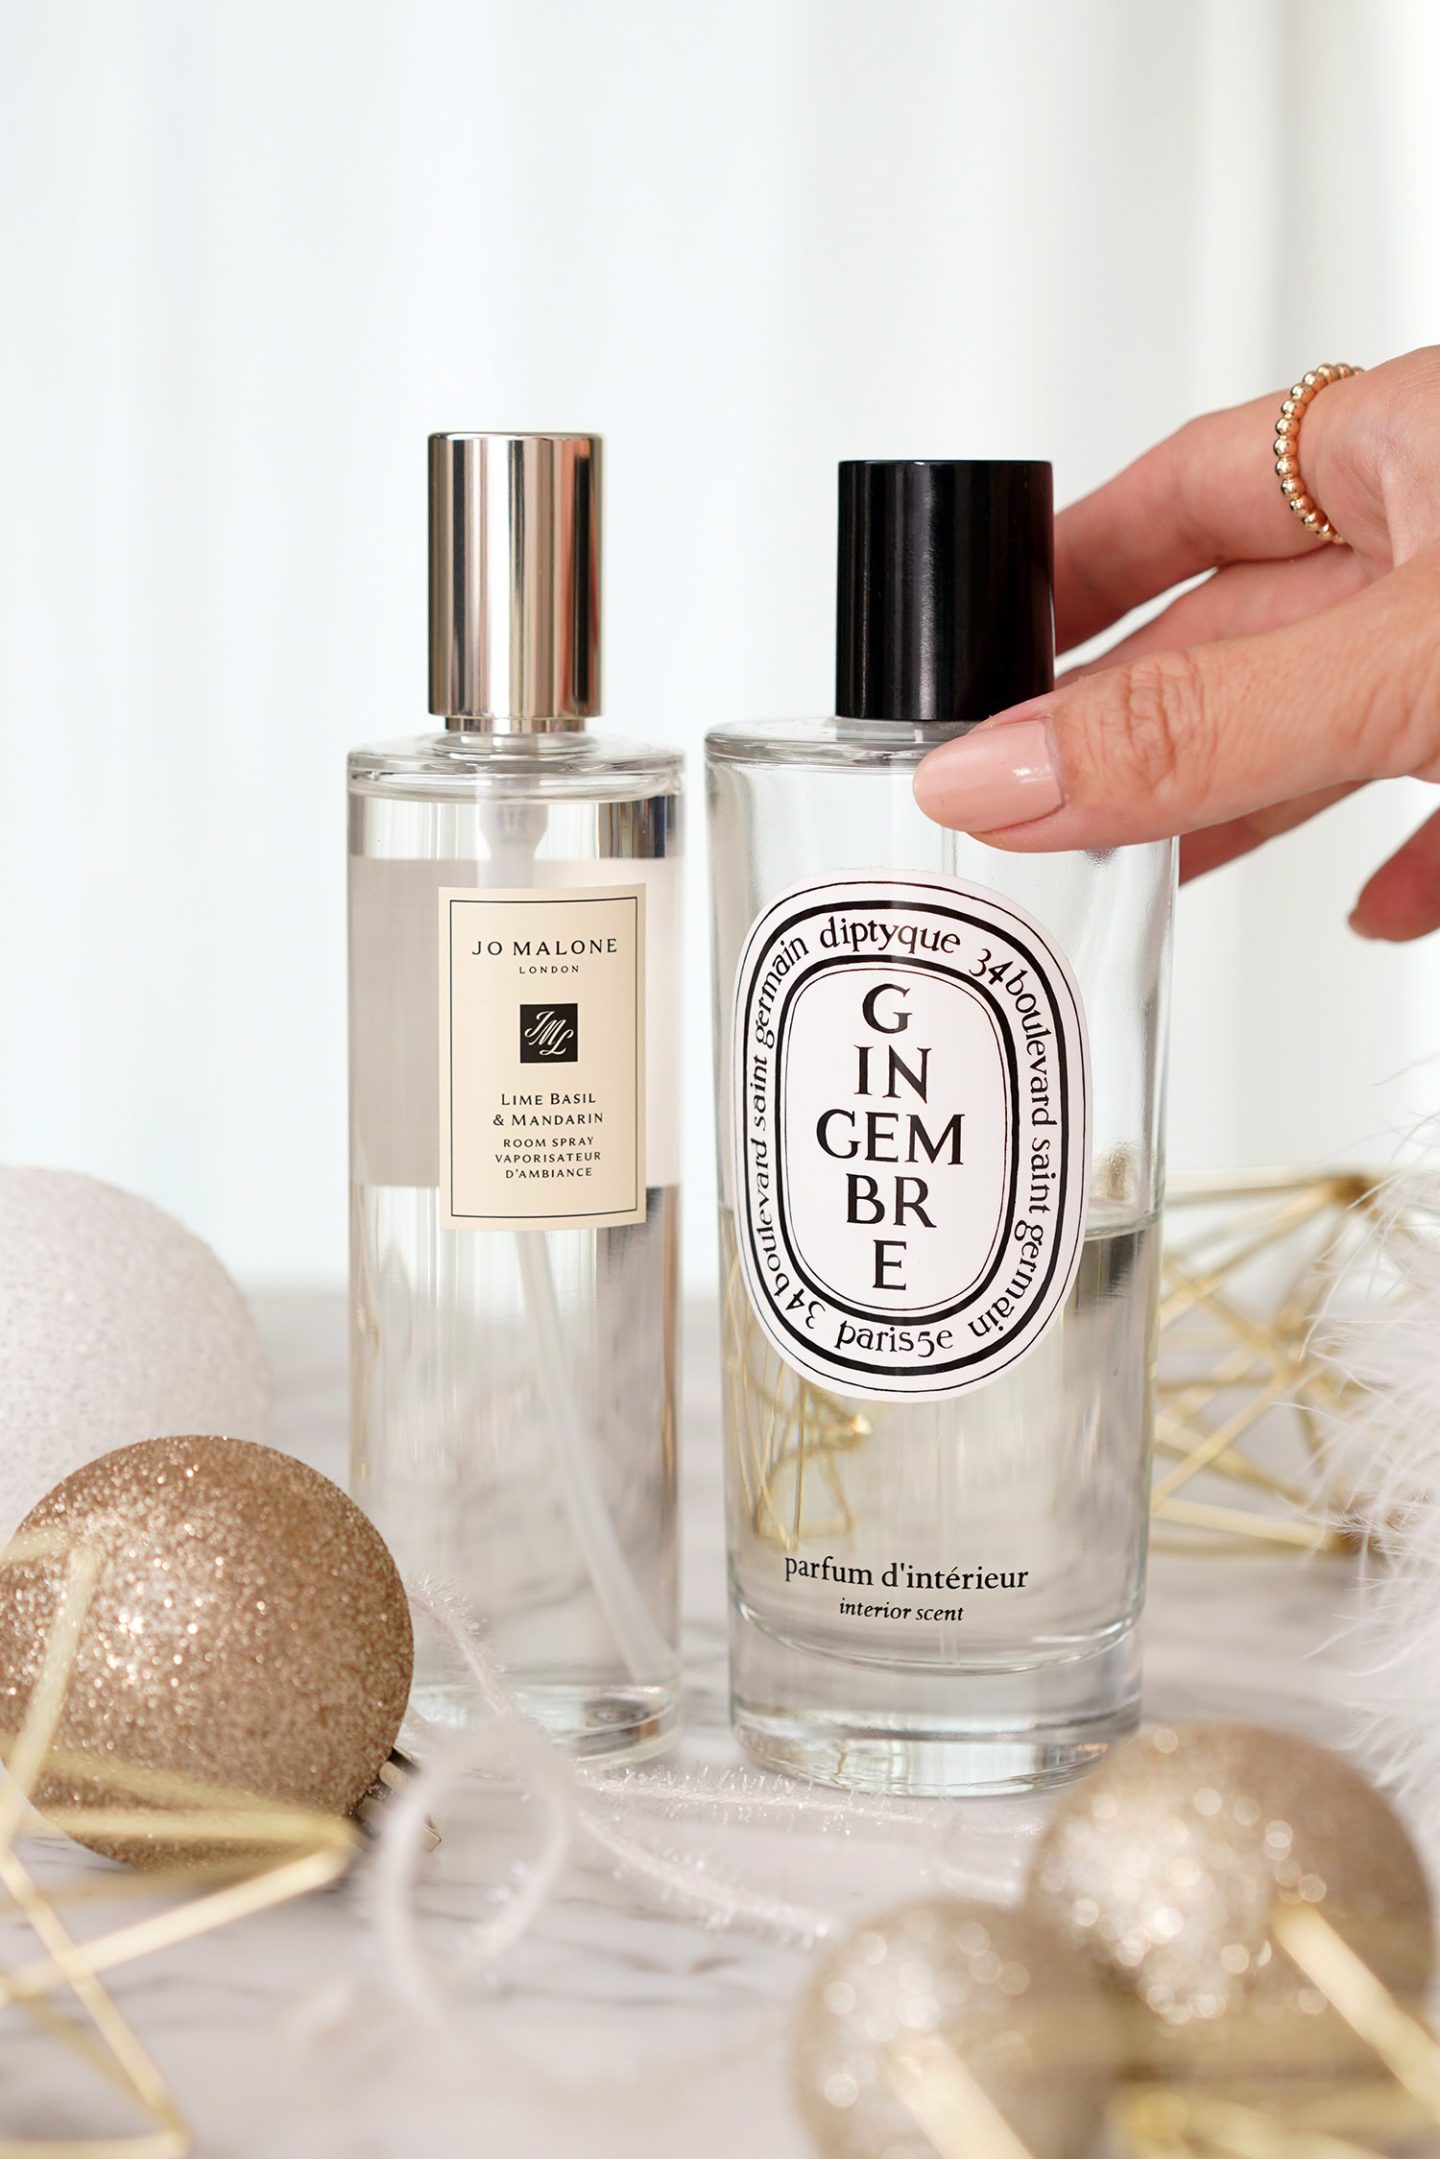 Jo Malone and Diptyque Room Sprays